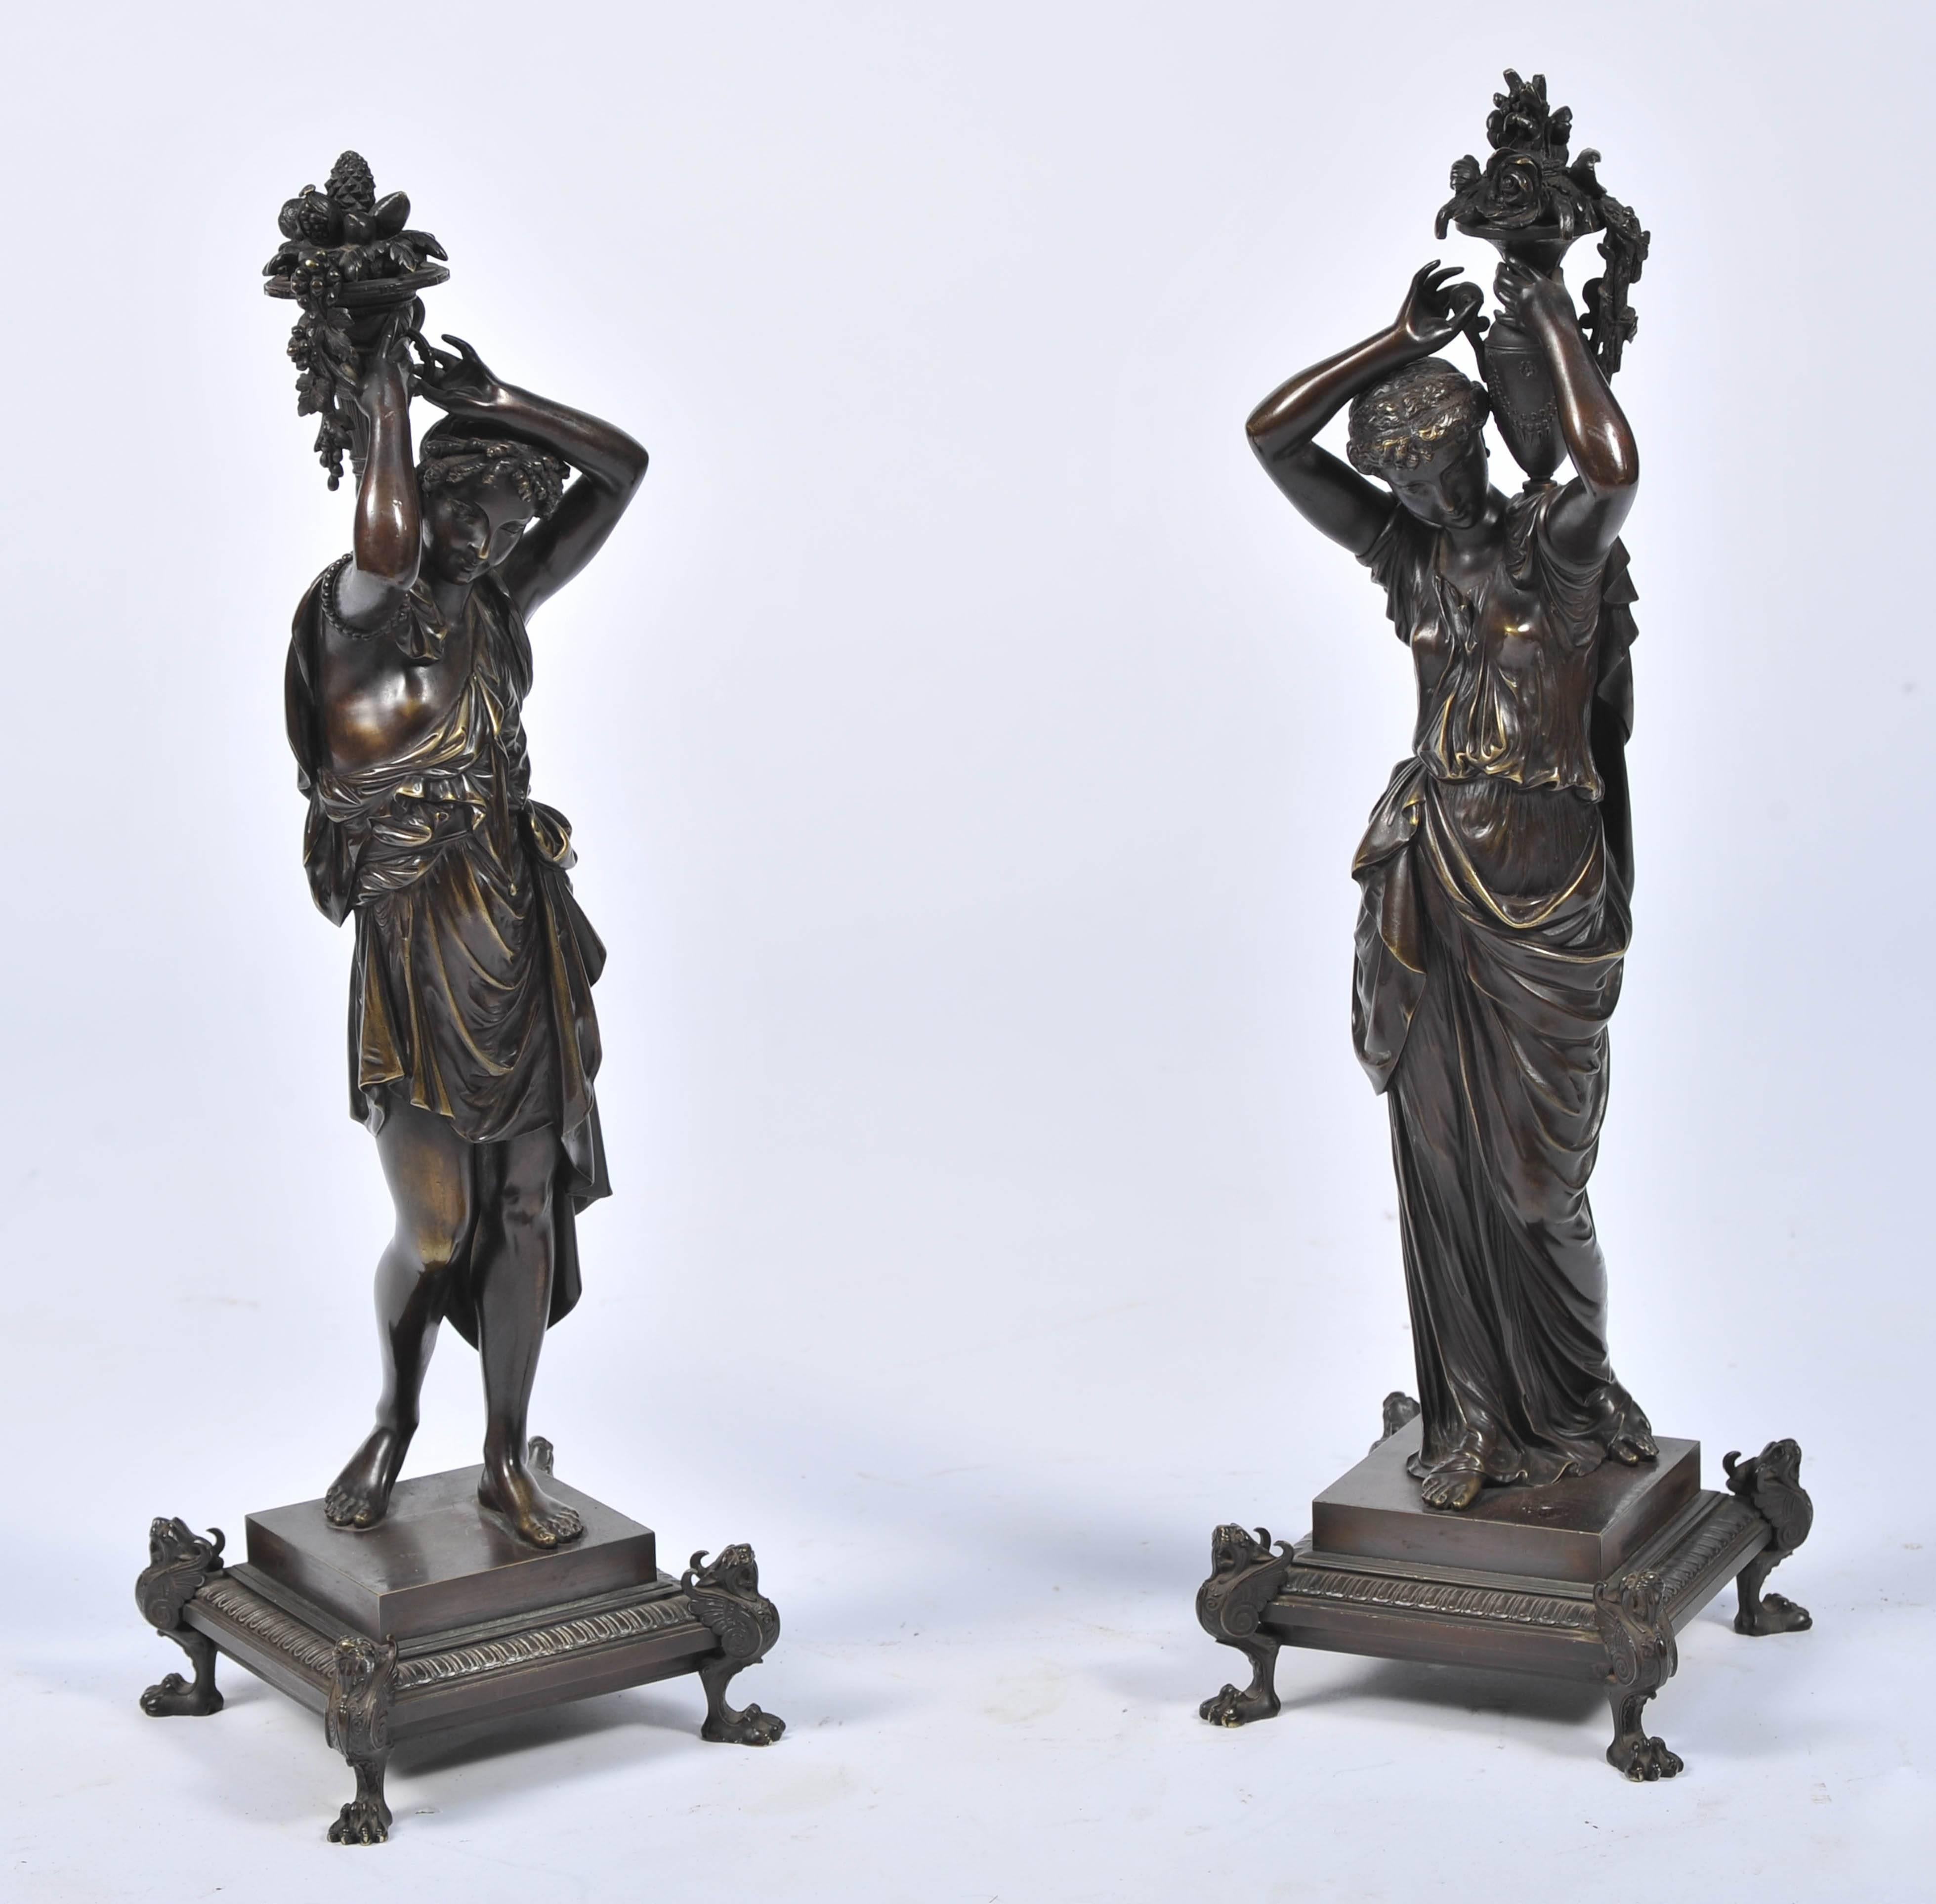 A good quality pair of 19th century French bronze statues depicting a male and female dressed in robes, carrying vases of flowers and fruit, mounted on square bases with claw feet.